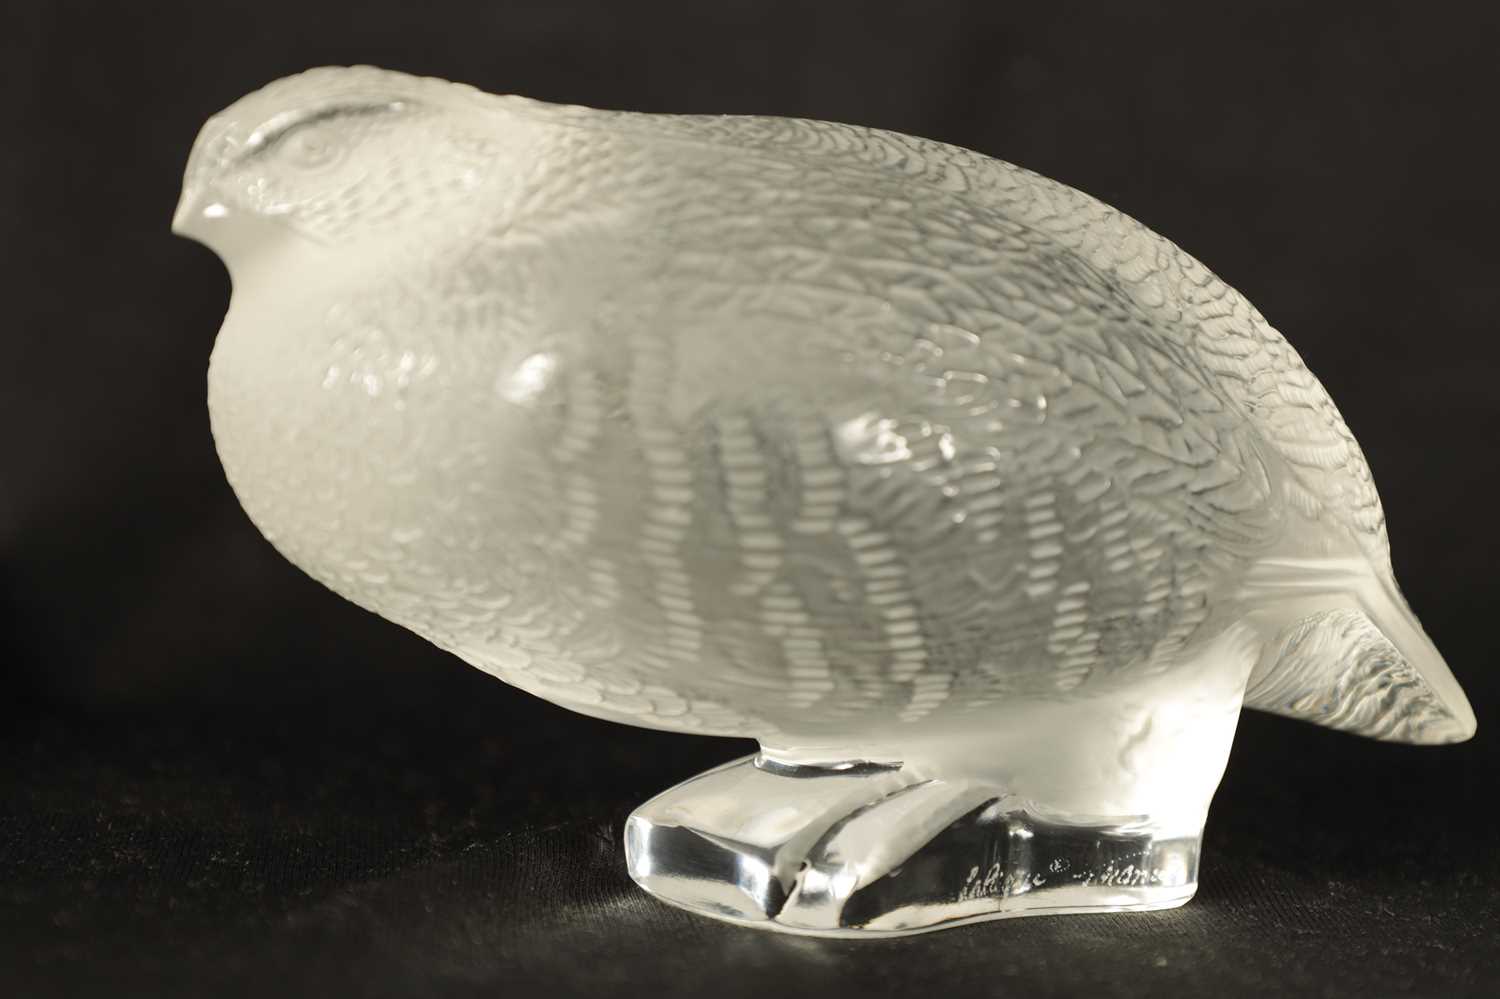 A LALIQUE FRANCE FROSTED GLASS BIRD SCULPTURE - Image 3 of 10